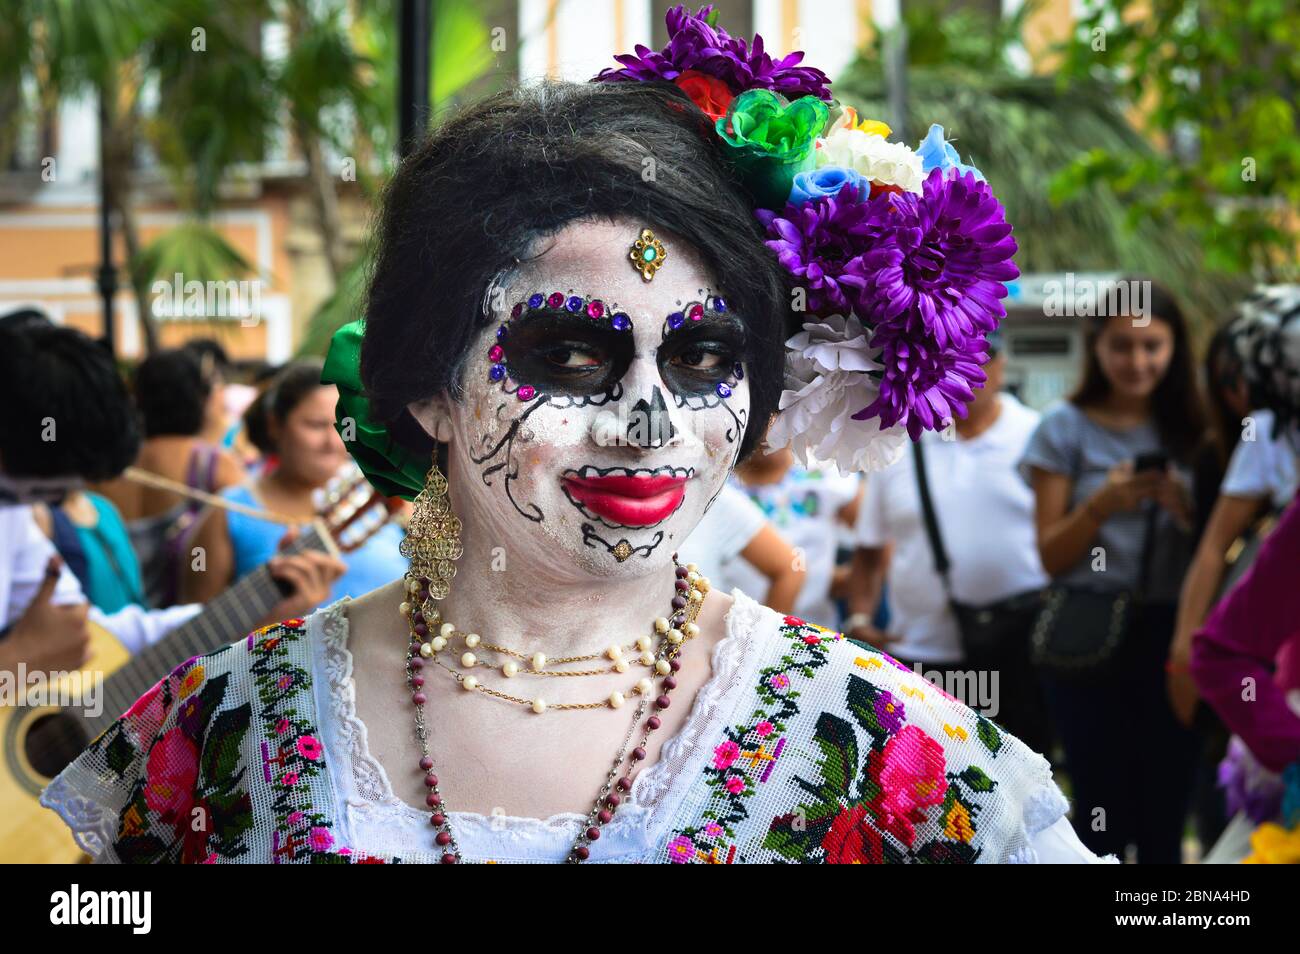 Young Mexican woman, street performer, dressed as a Catrina for day of the dead in Merida, Yucatan, Mexico. Stock Photo